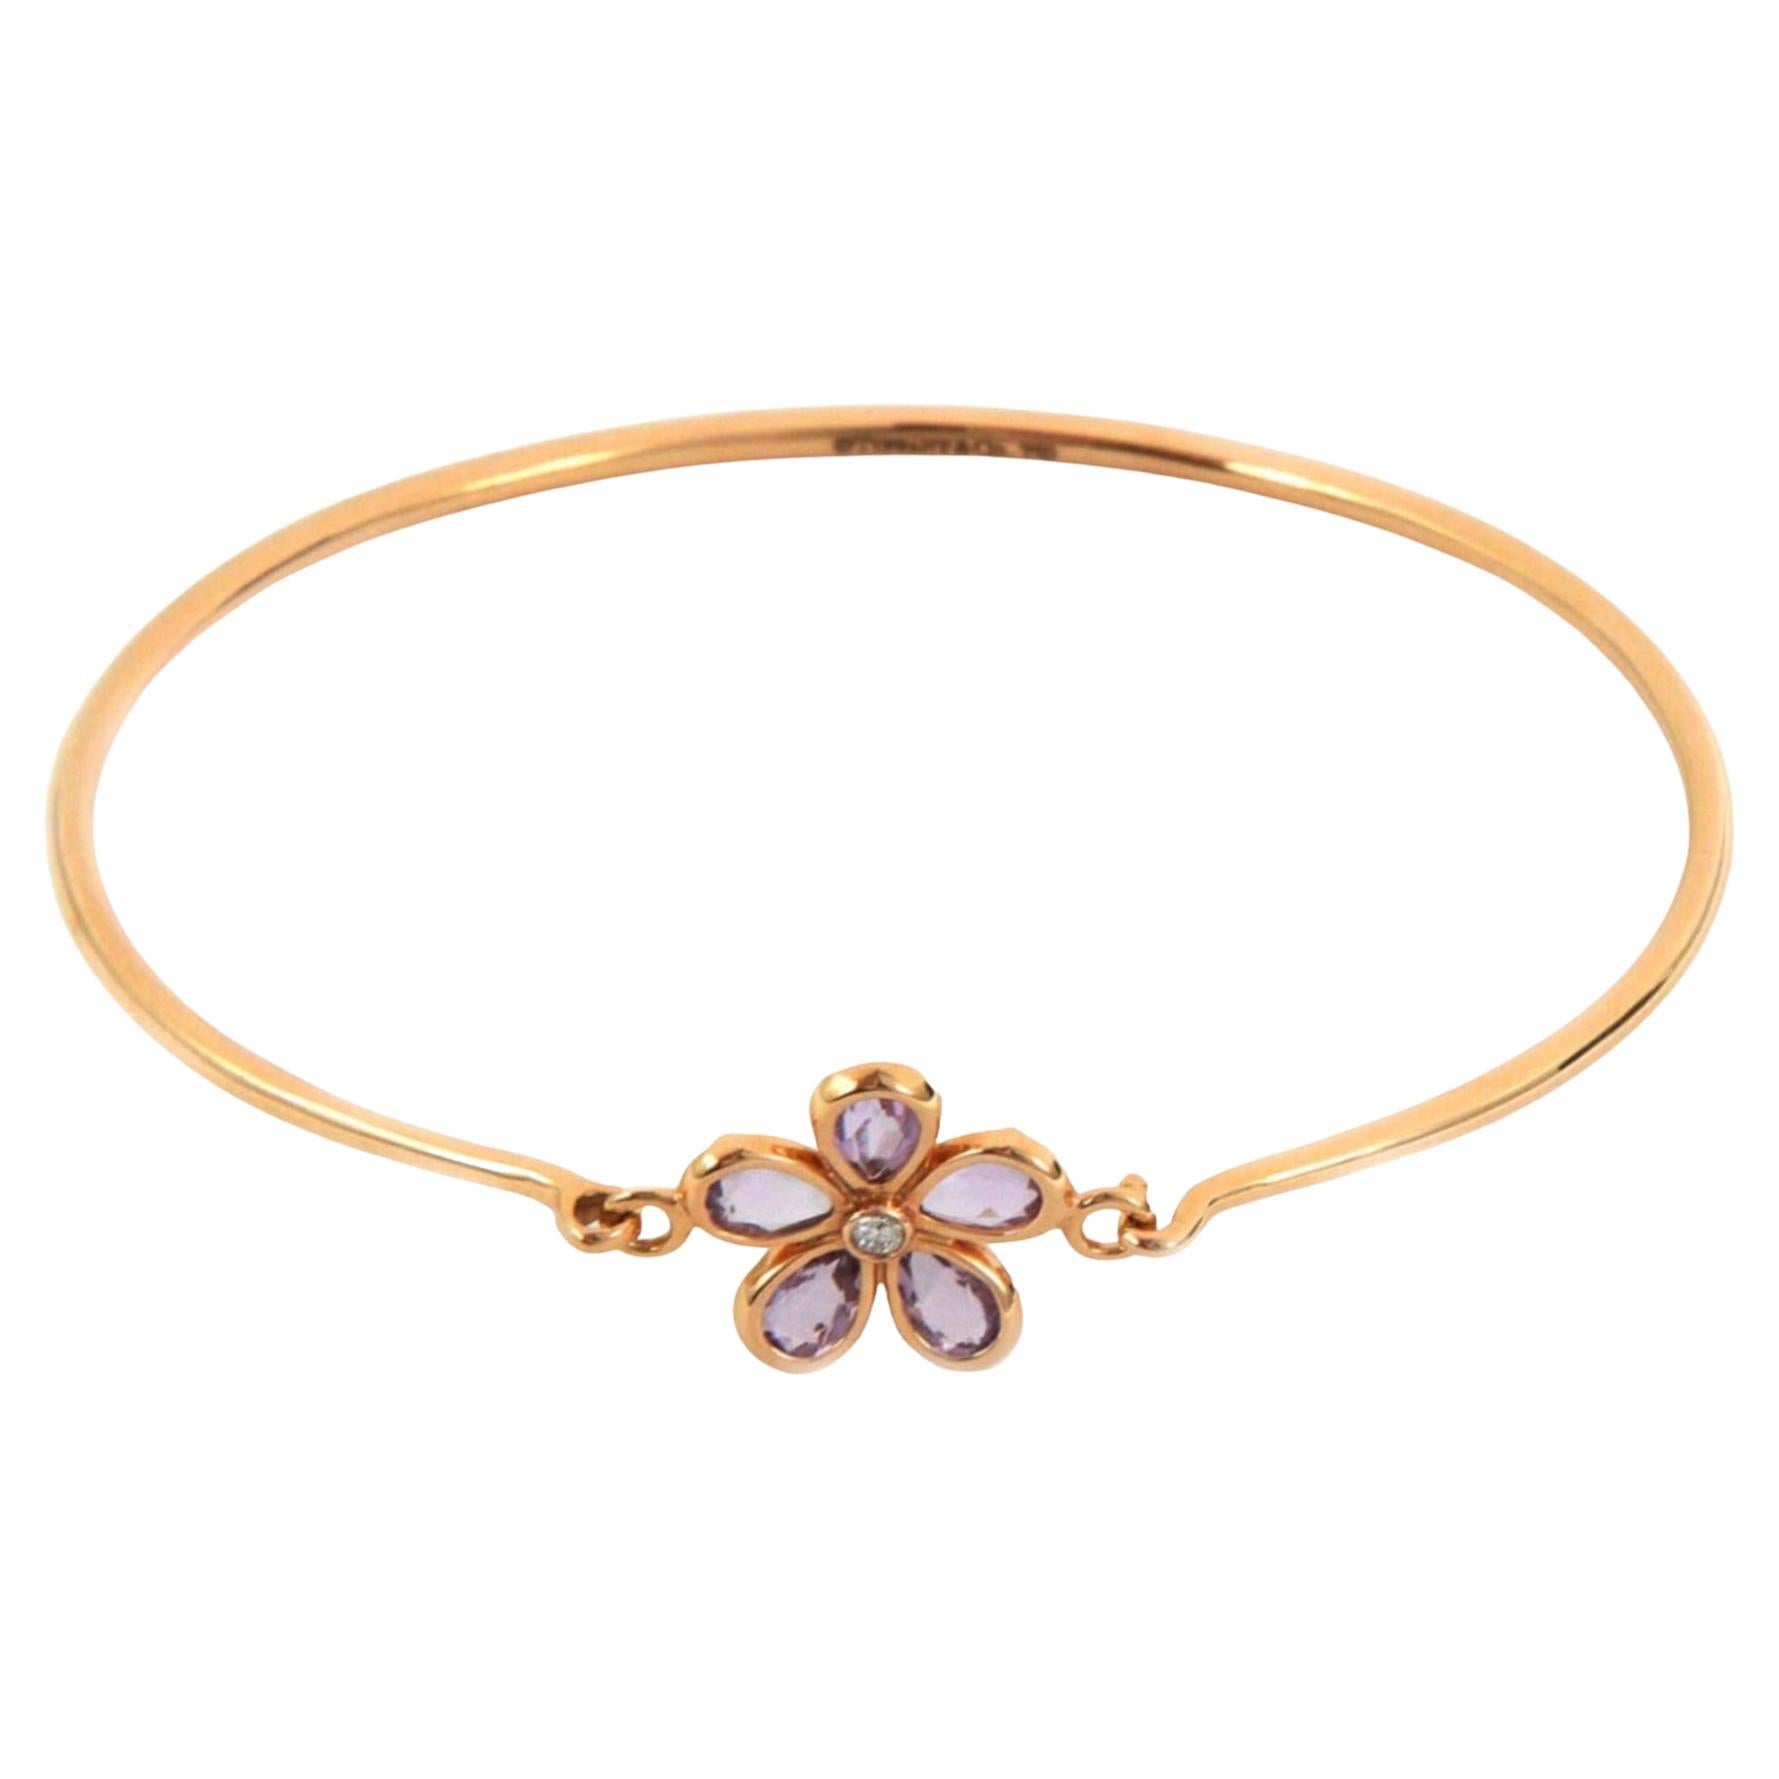 Beautiful and authentic by Tiffany & Co. from their Garden Collection, this adorable purple flower has 5 pear shape amethyst gemstones in pear shape 18k rose gold floral frame with a 2 points diamond in the center. The 18k rose gold wire bangle has